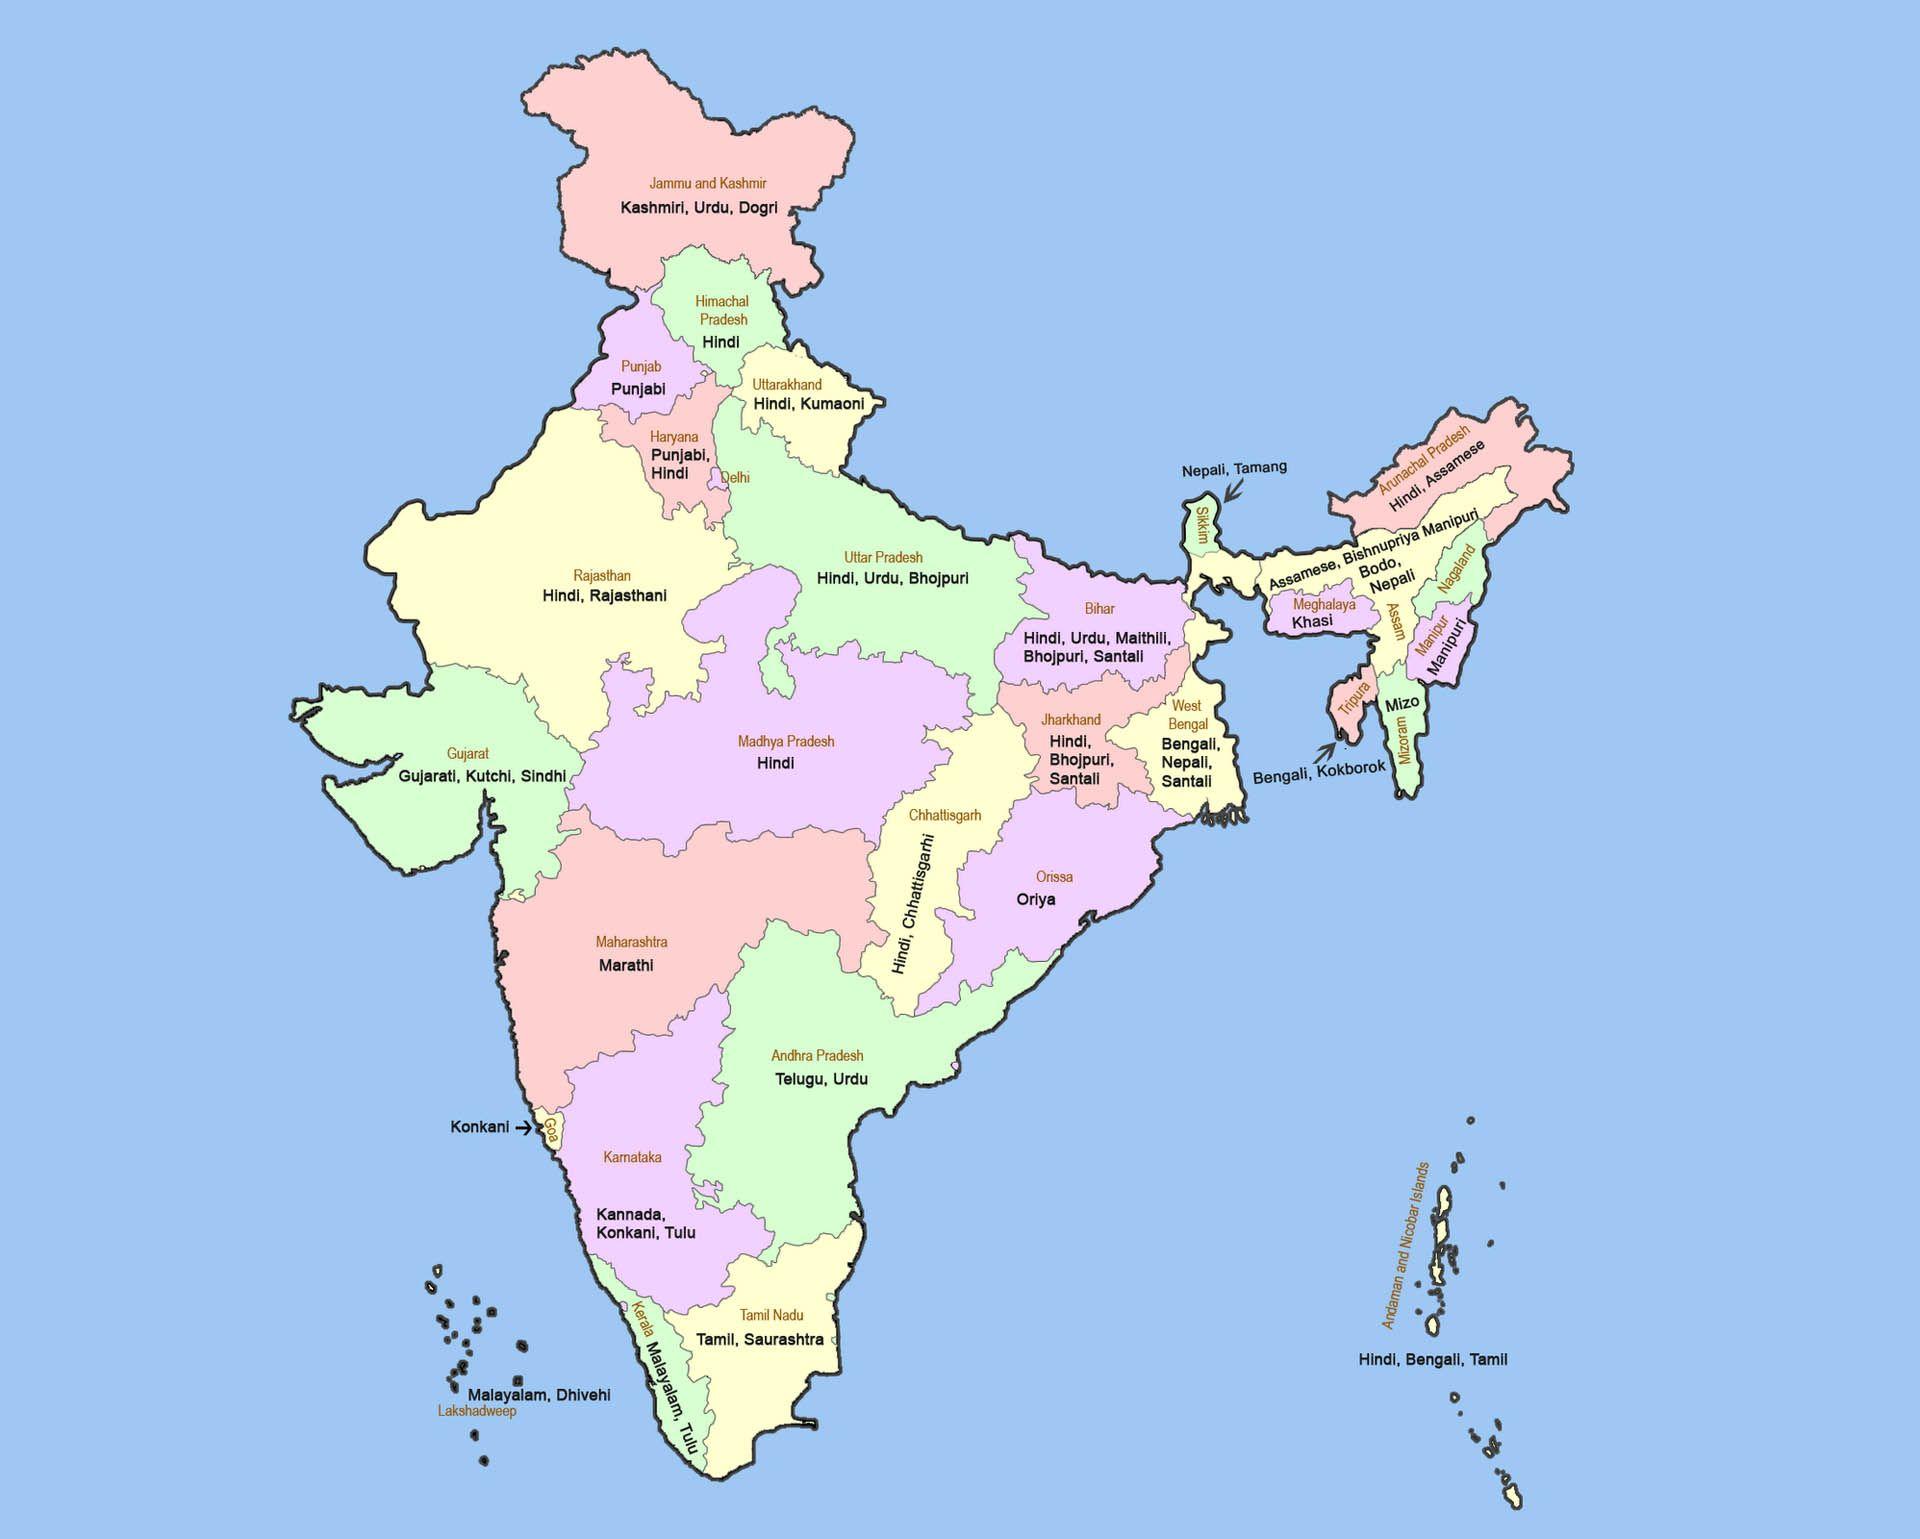 India Map Photo, Download India Map Wallpaper, Download Free